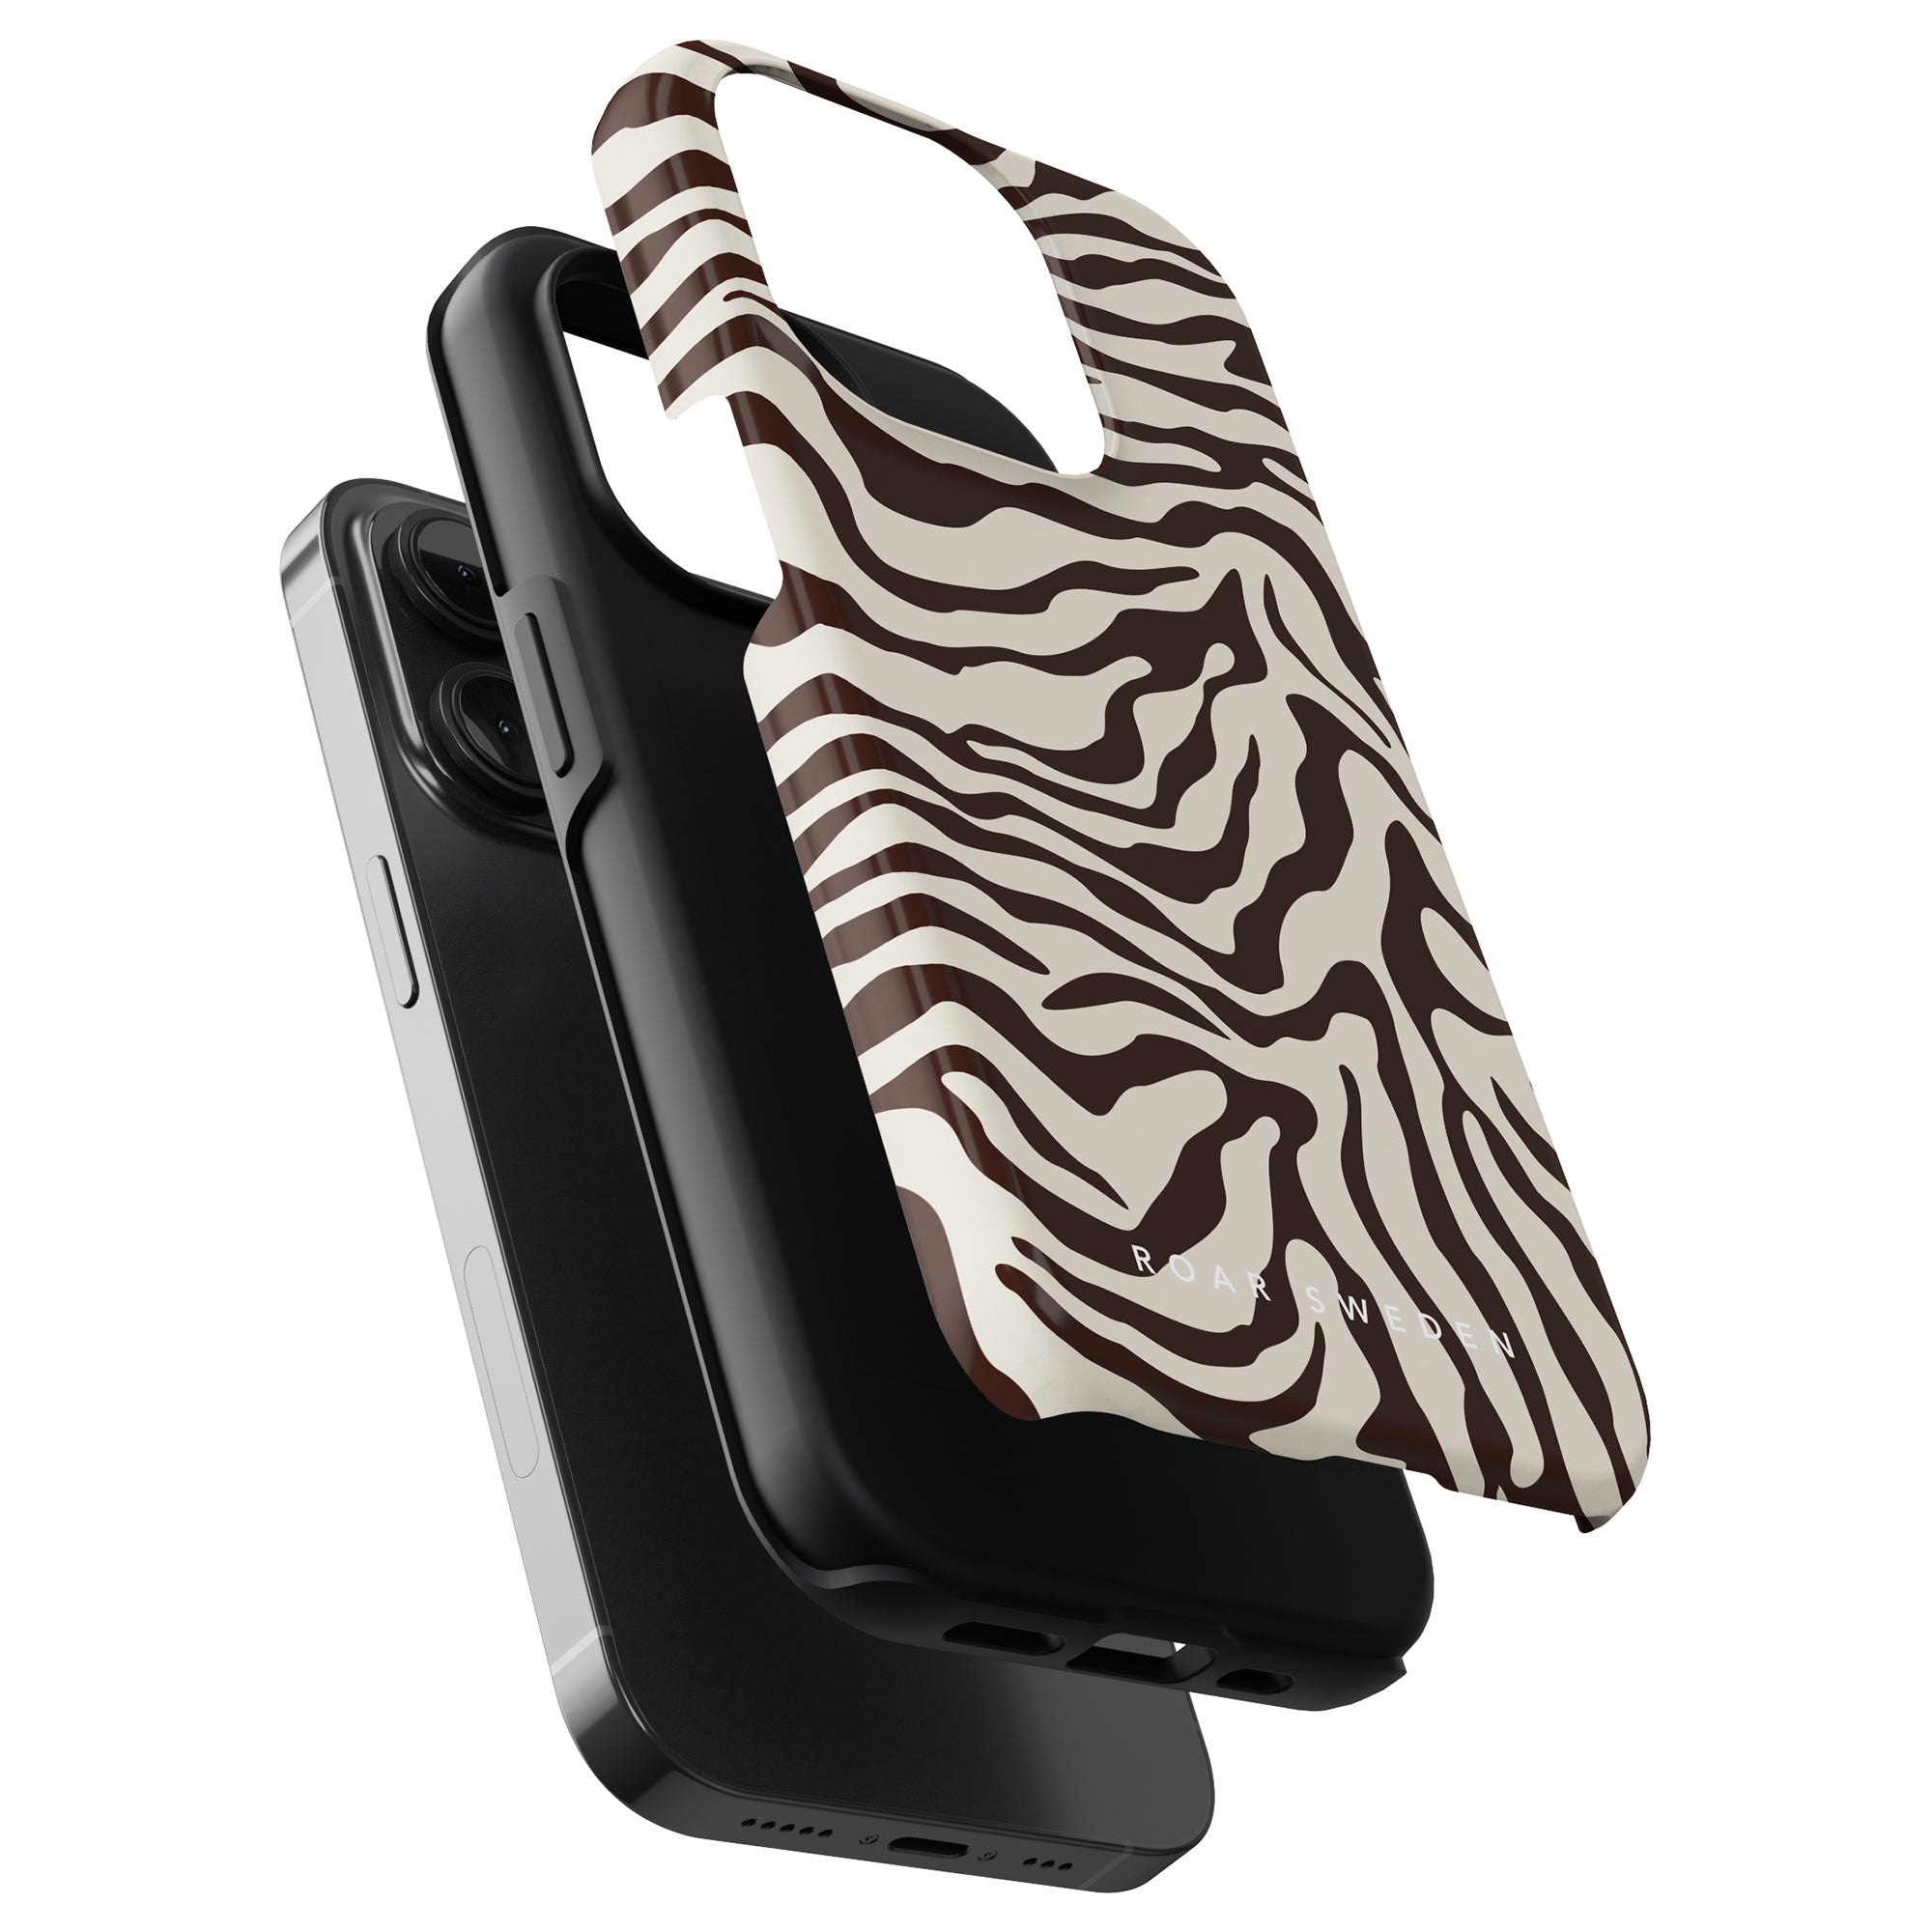 Two smartphones in black cases, one with a Mocha - Tough Case from the zebra kollektion, displayed in a back-to-back arrangement.